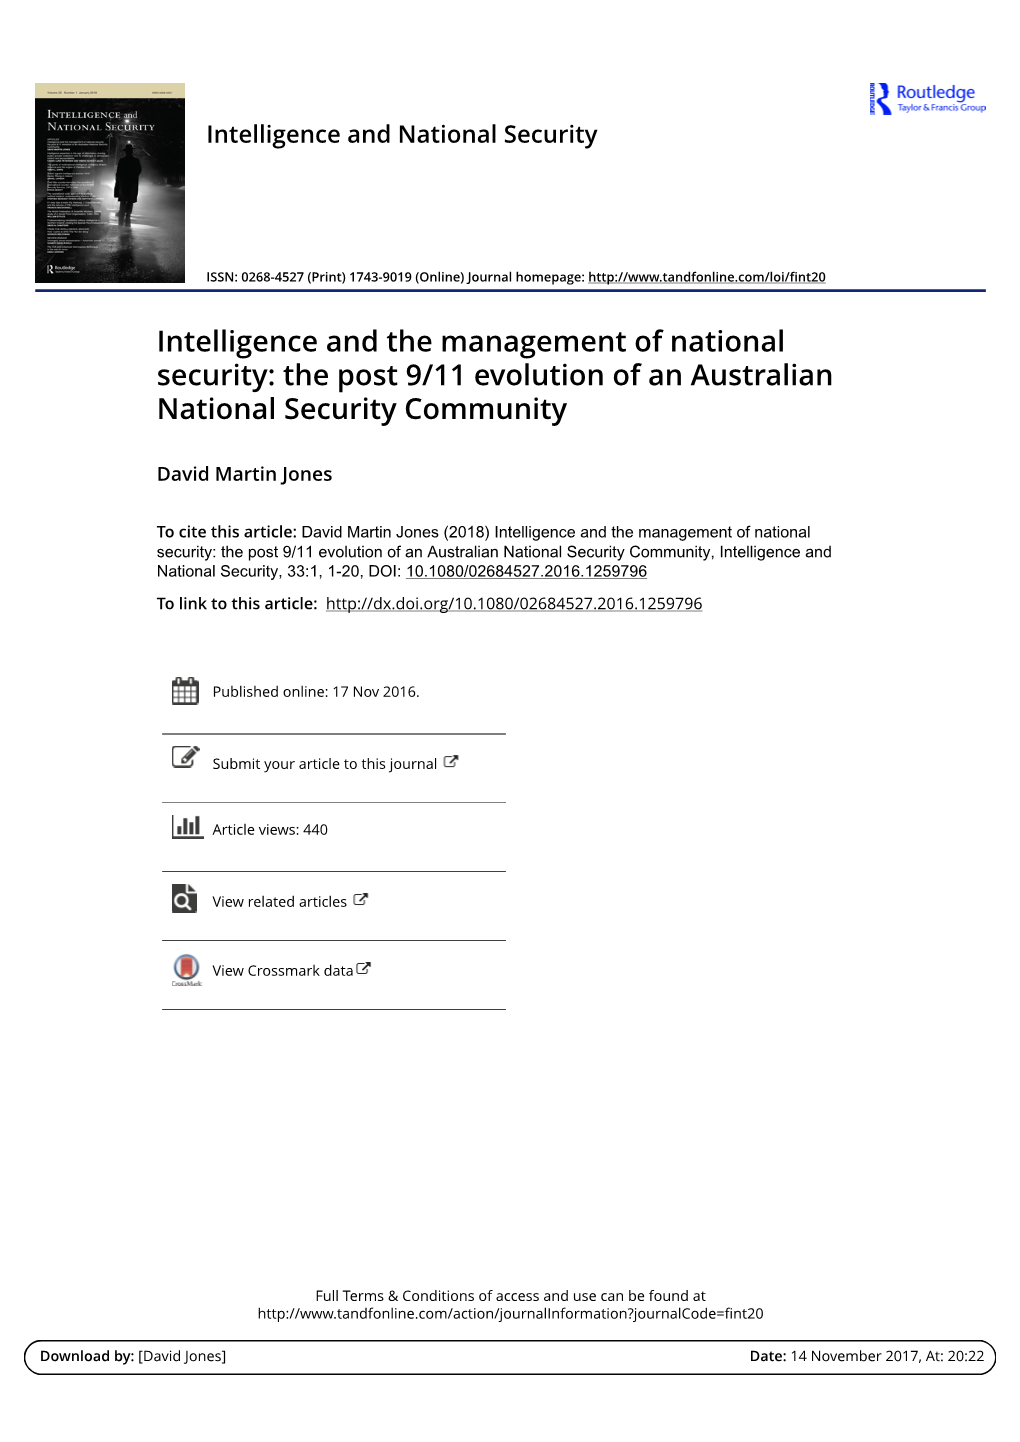 The Post 9/11 Evolution of an Australian National Security Community